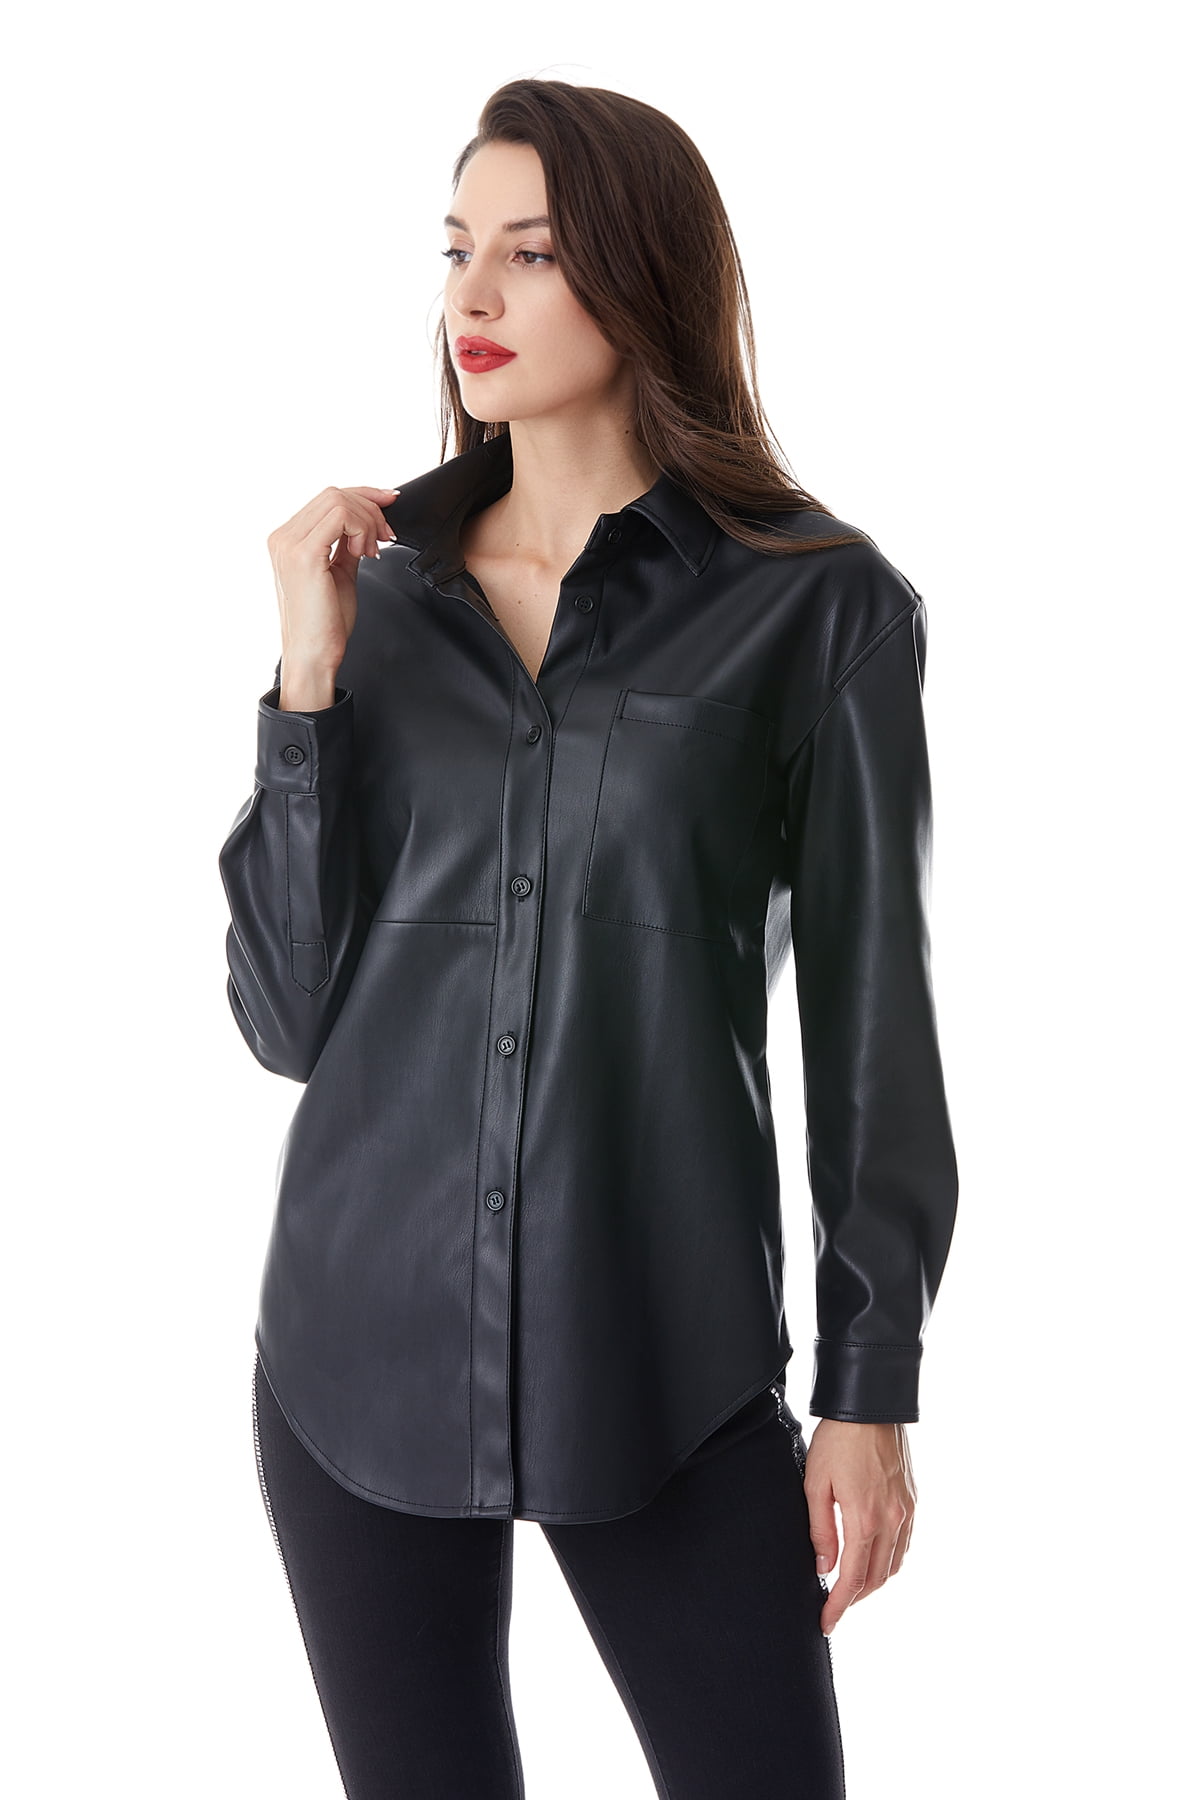 S P Y M Women's Faux Leather Jacket Regular and Plus Size Soft Snap ...